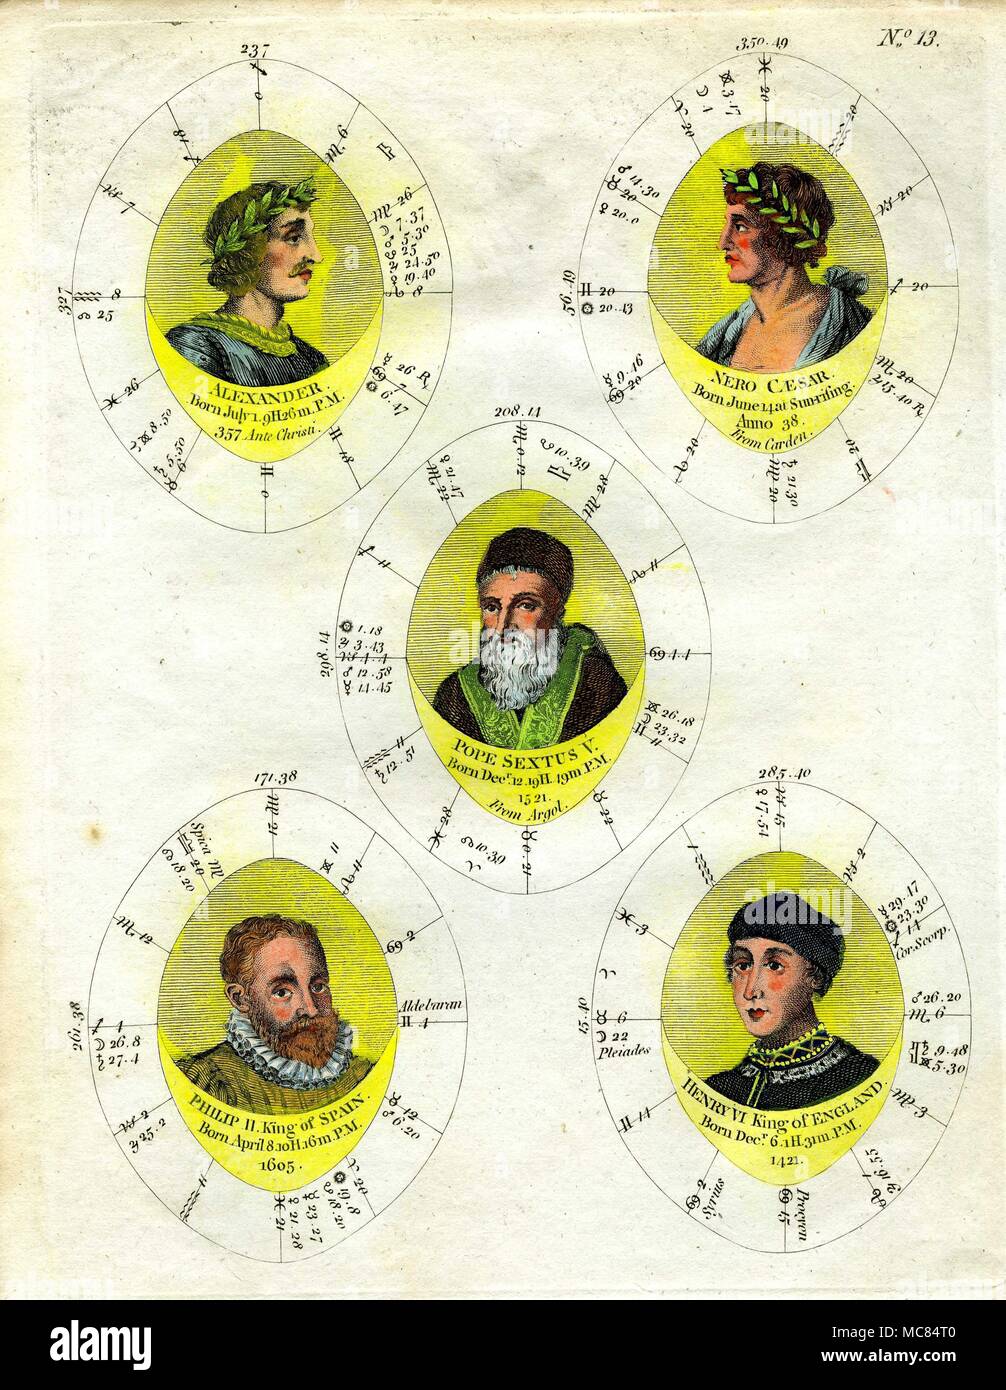 The charts of Alexander, Nero, Sextus V, Philip II of Spain, and Henry VI of England. From Ebenezer Sibly's 'A Complete Illustration of the Occult Arts' - 1812 edition. Stock Photo